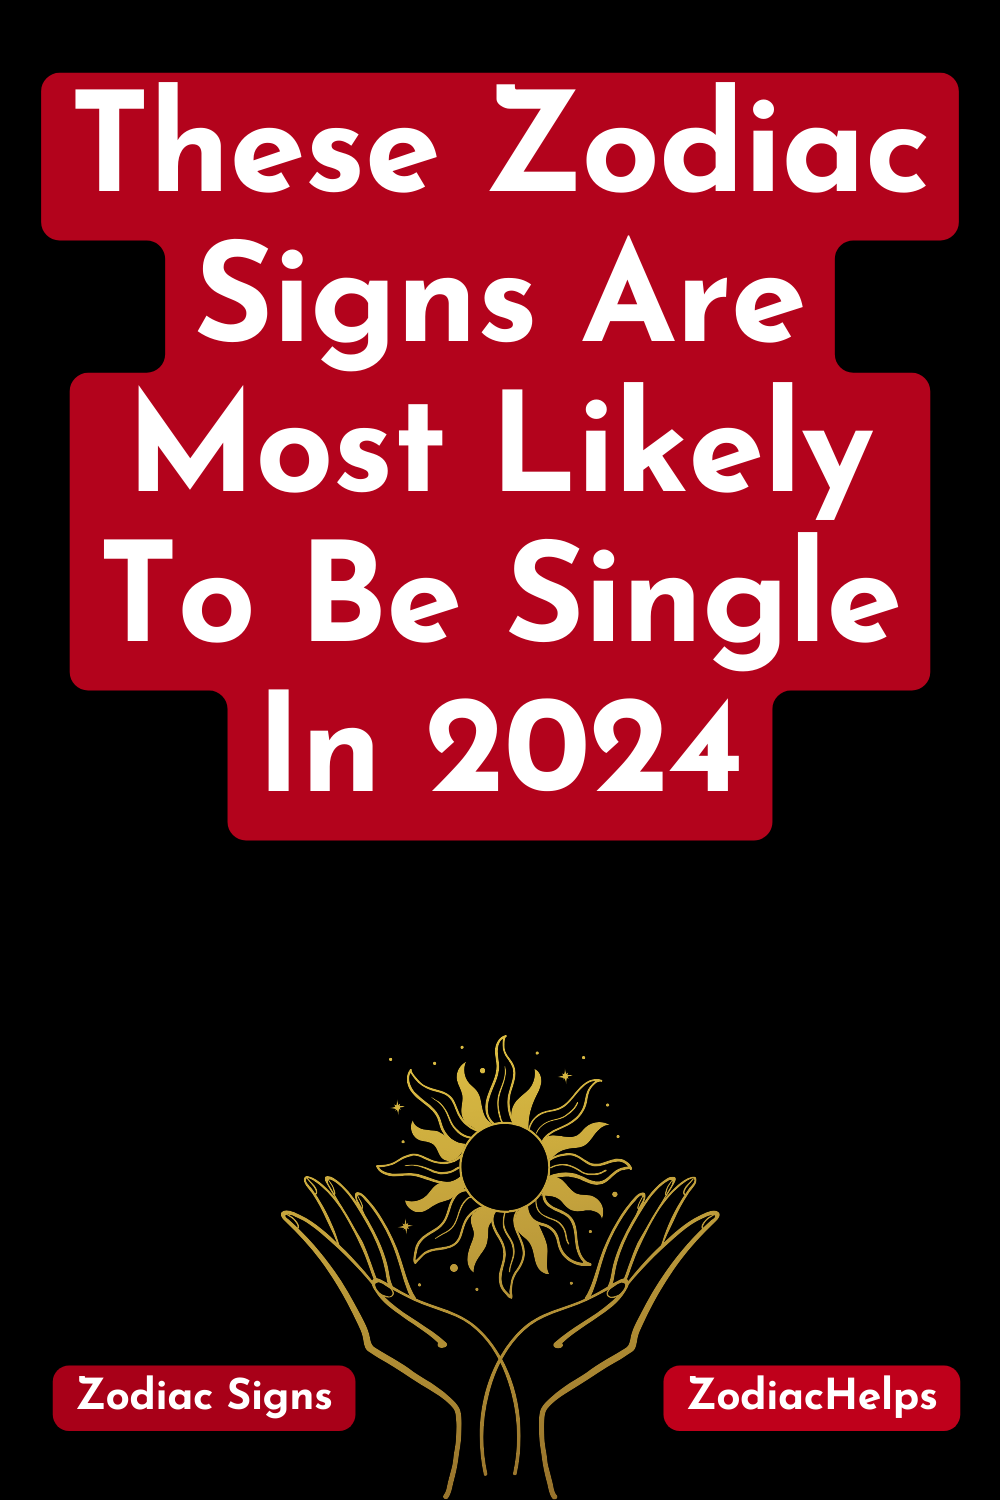 These Zodiac Signs Are Most Likely To Be Single In 2024